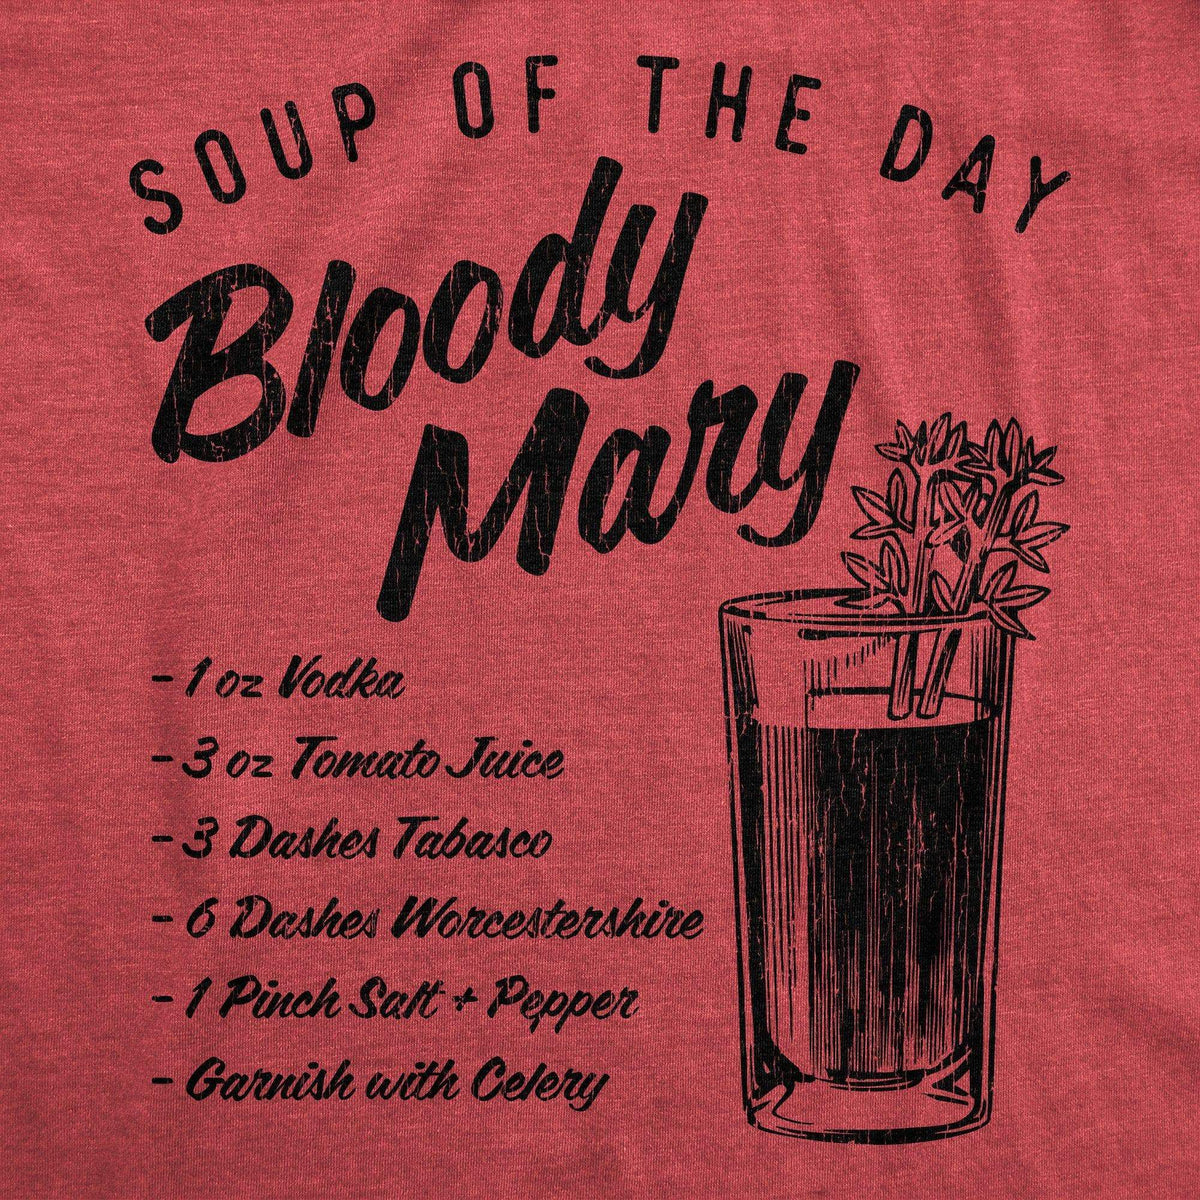 Soup Of The Day Bloody Mary Women&#39;s Tshirt - Crazy Dog T-Shirts